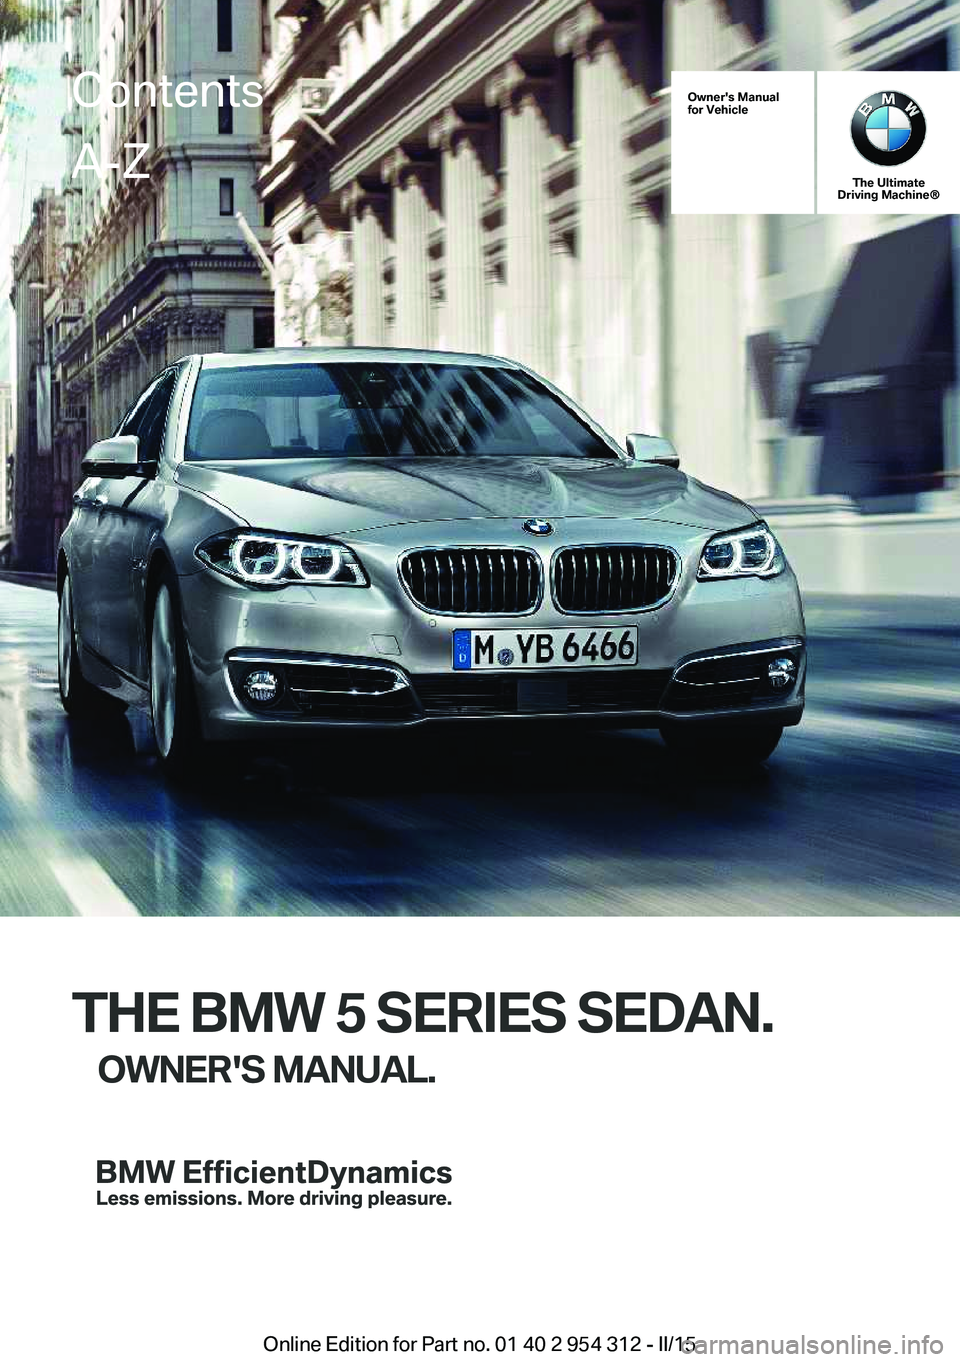 BMW 535I SEDAN 2016  Owners Manual Owner's Manual
for Vehicle
The Ultimate
Driving Machine®
THE BMW 5 SERIES SEDAN.
OWNER'S MANUAL.
ContentsA-Z
Online Edition for Part no. 01 40 2 954 312 - II/15   